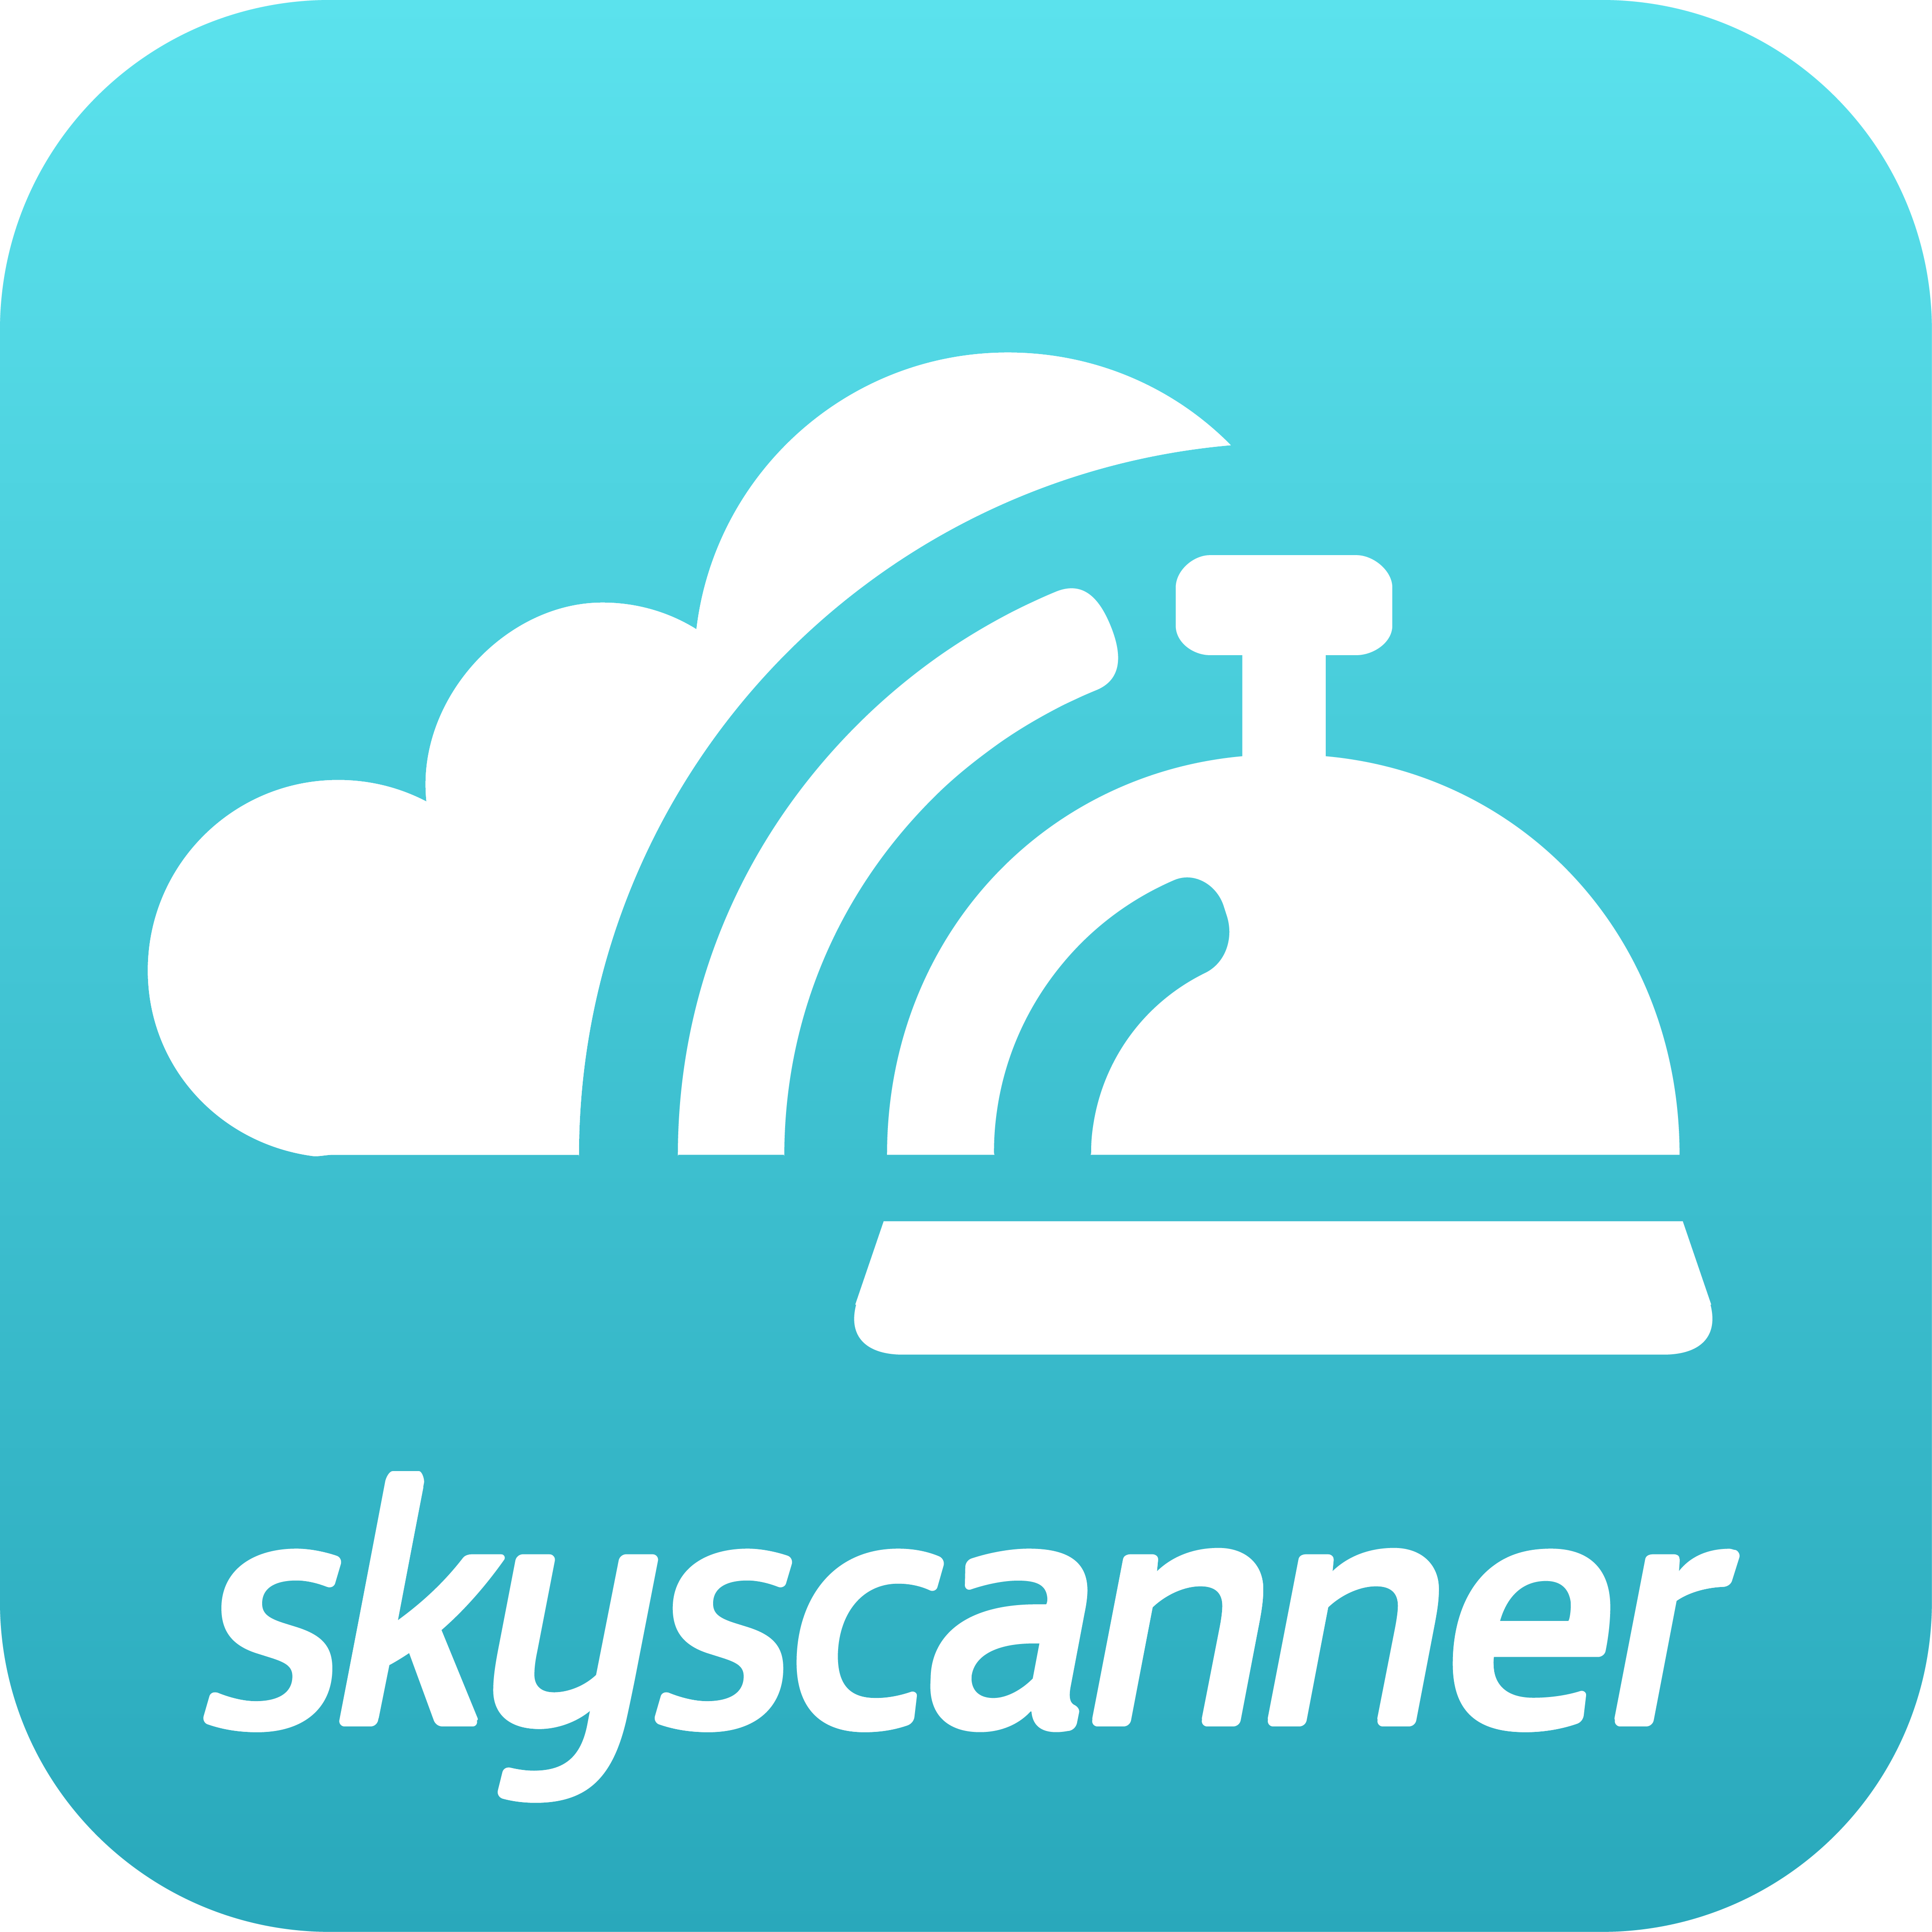 New Skyscanner Hotels App Helps Travelers Find the Perfect Hotel